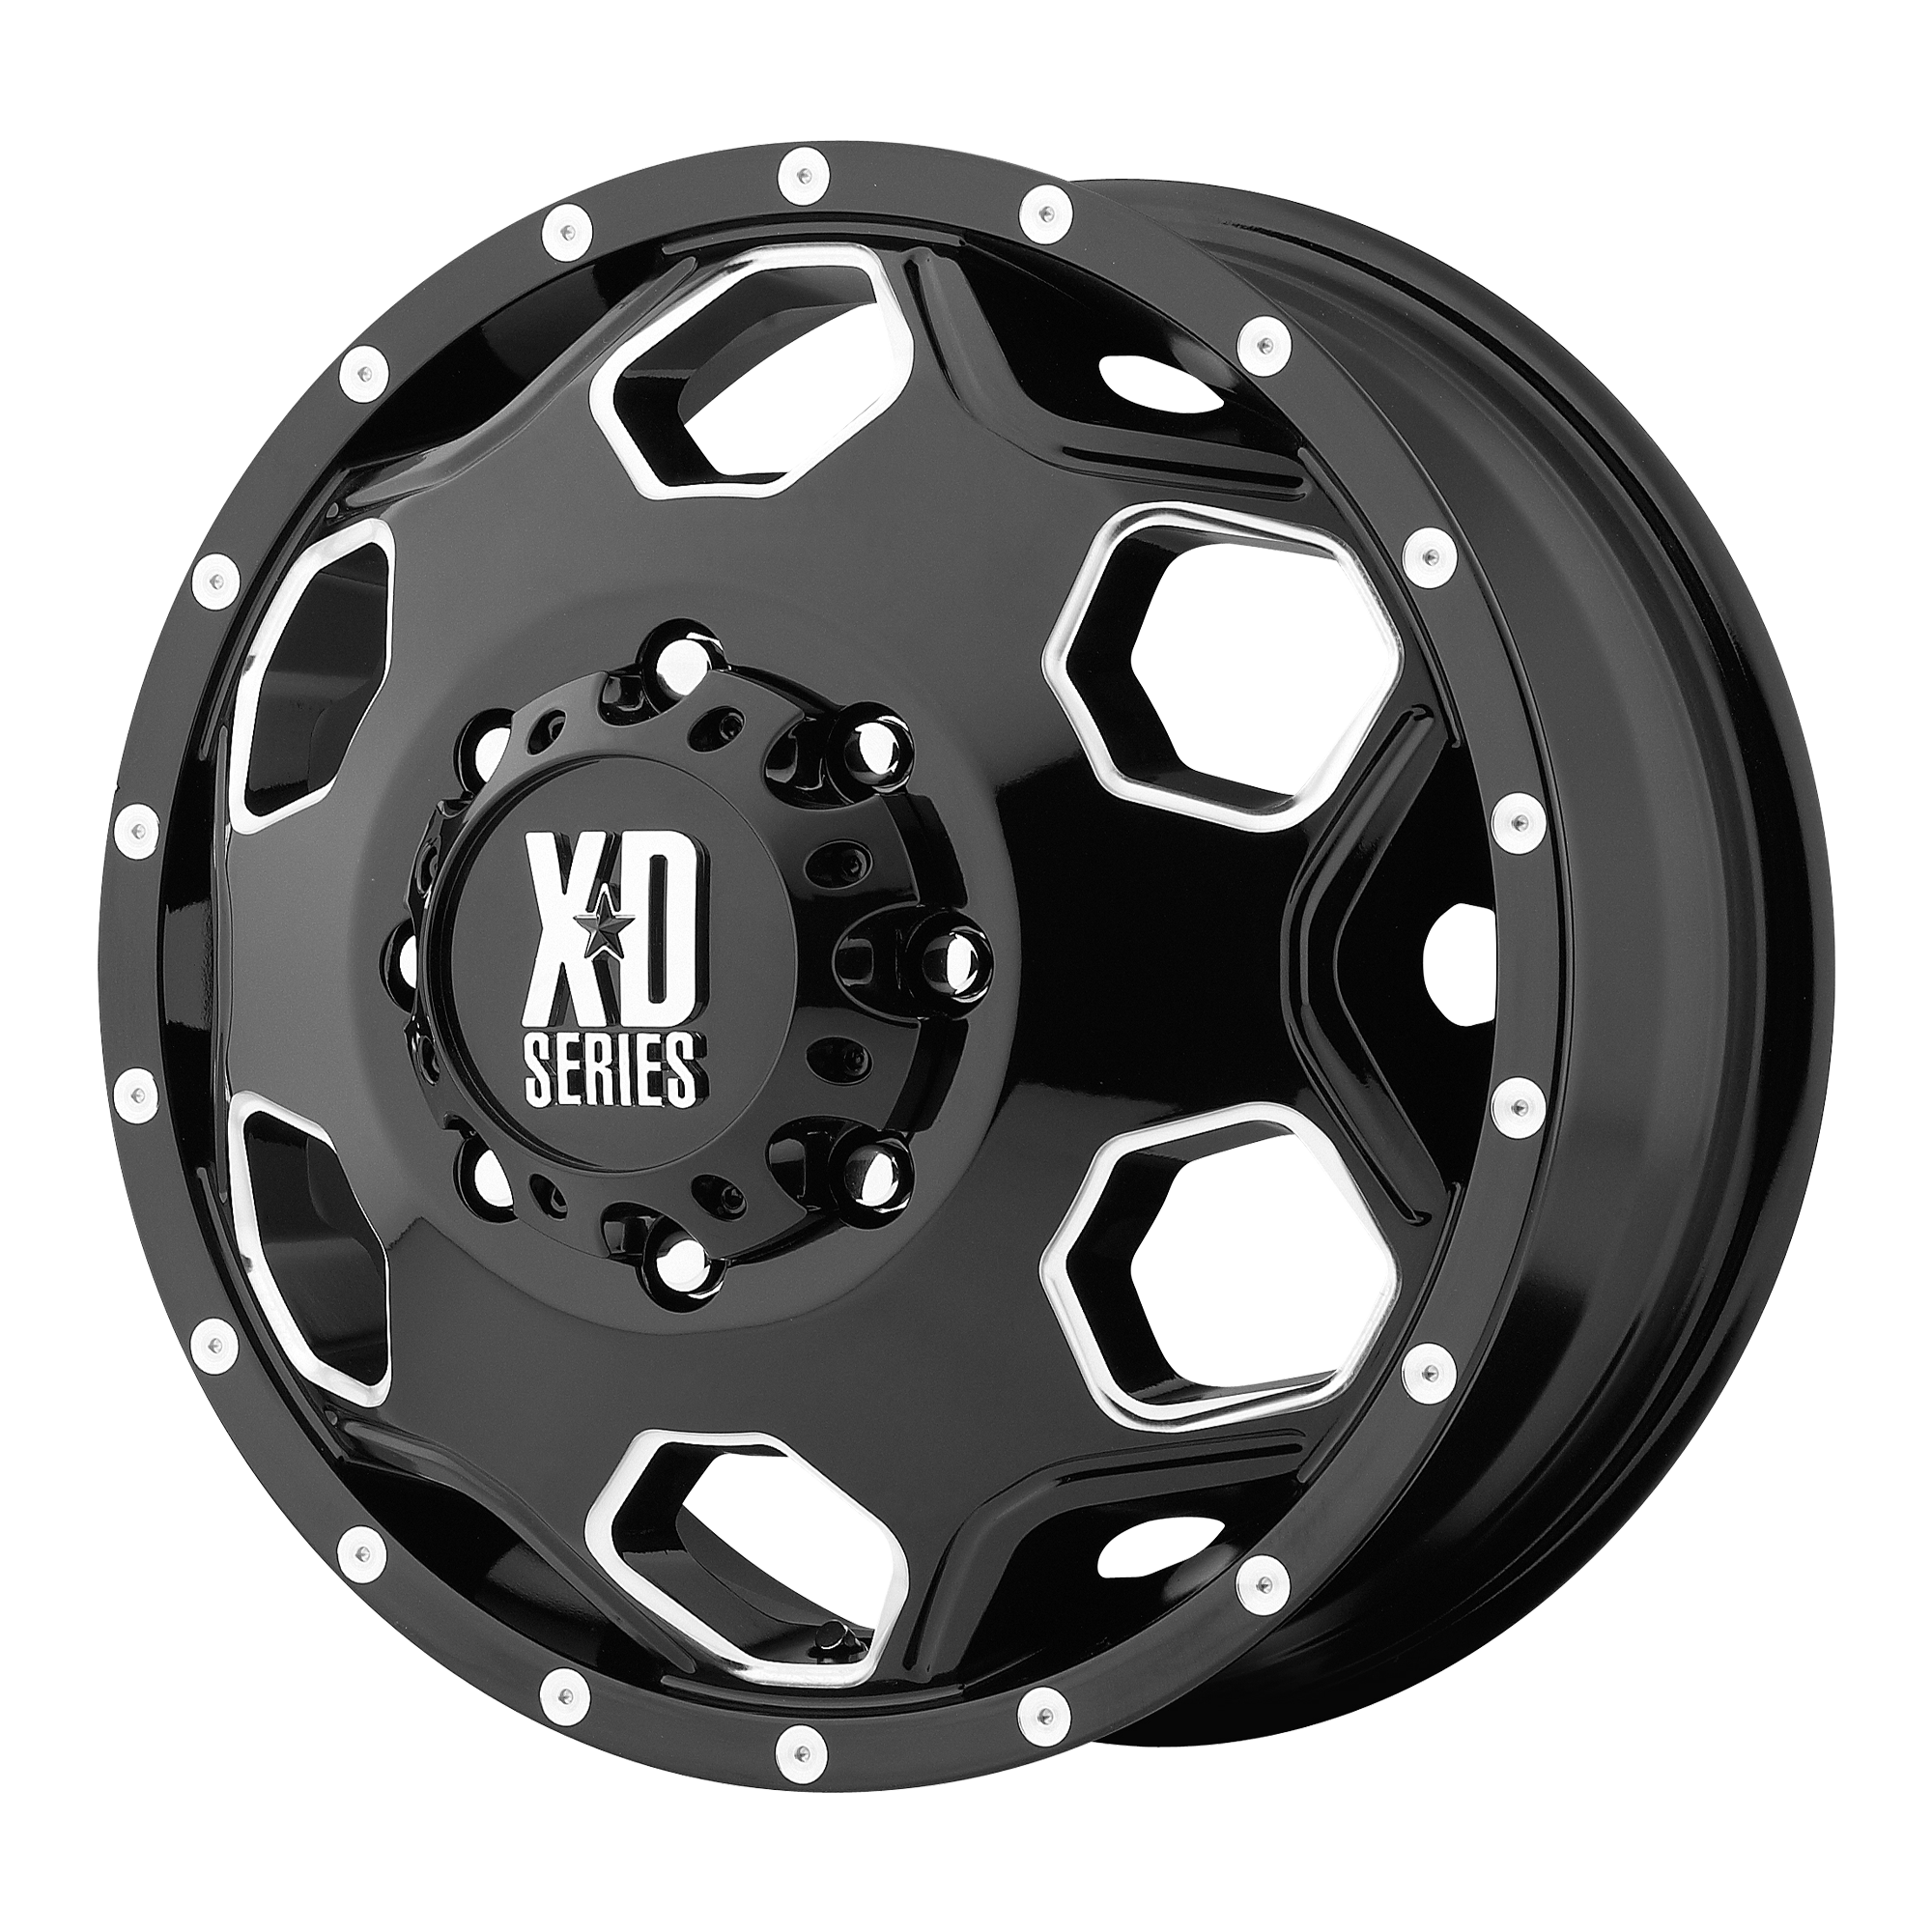 XD XD815 BATALLION 22X8.25 127 8X165.1 GLOSS BLACK WITH MILLED ACCENTS